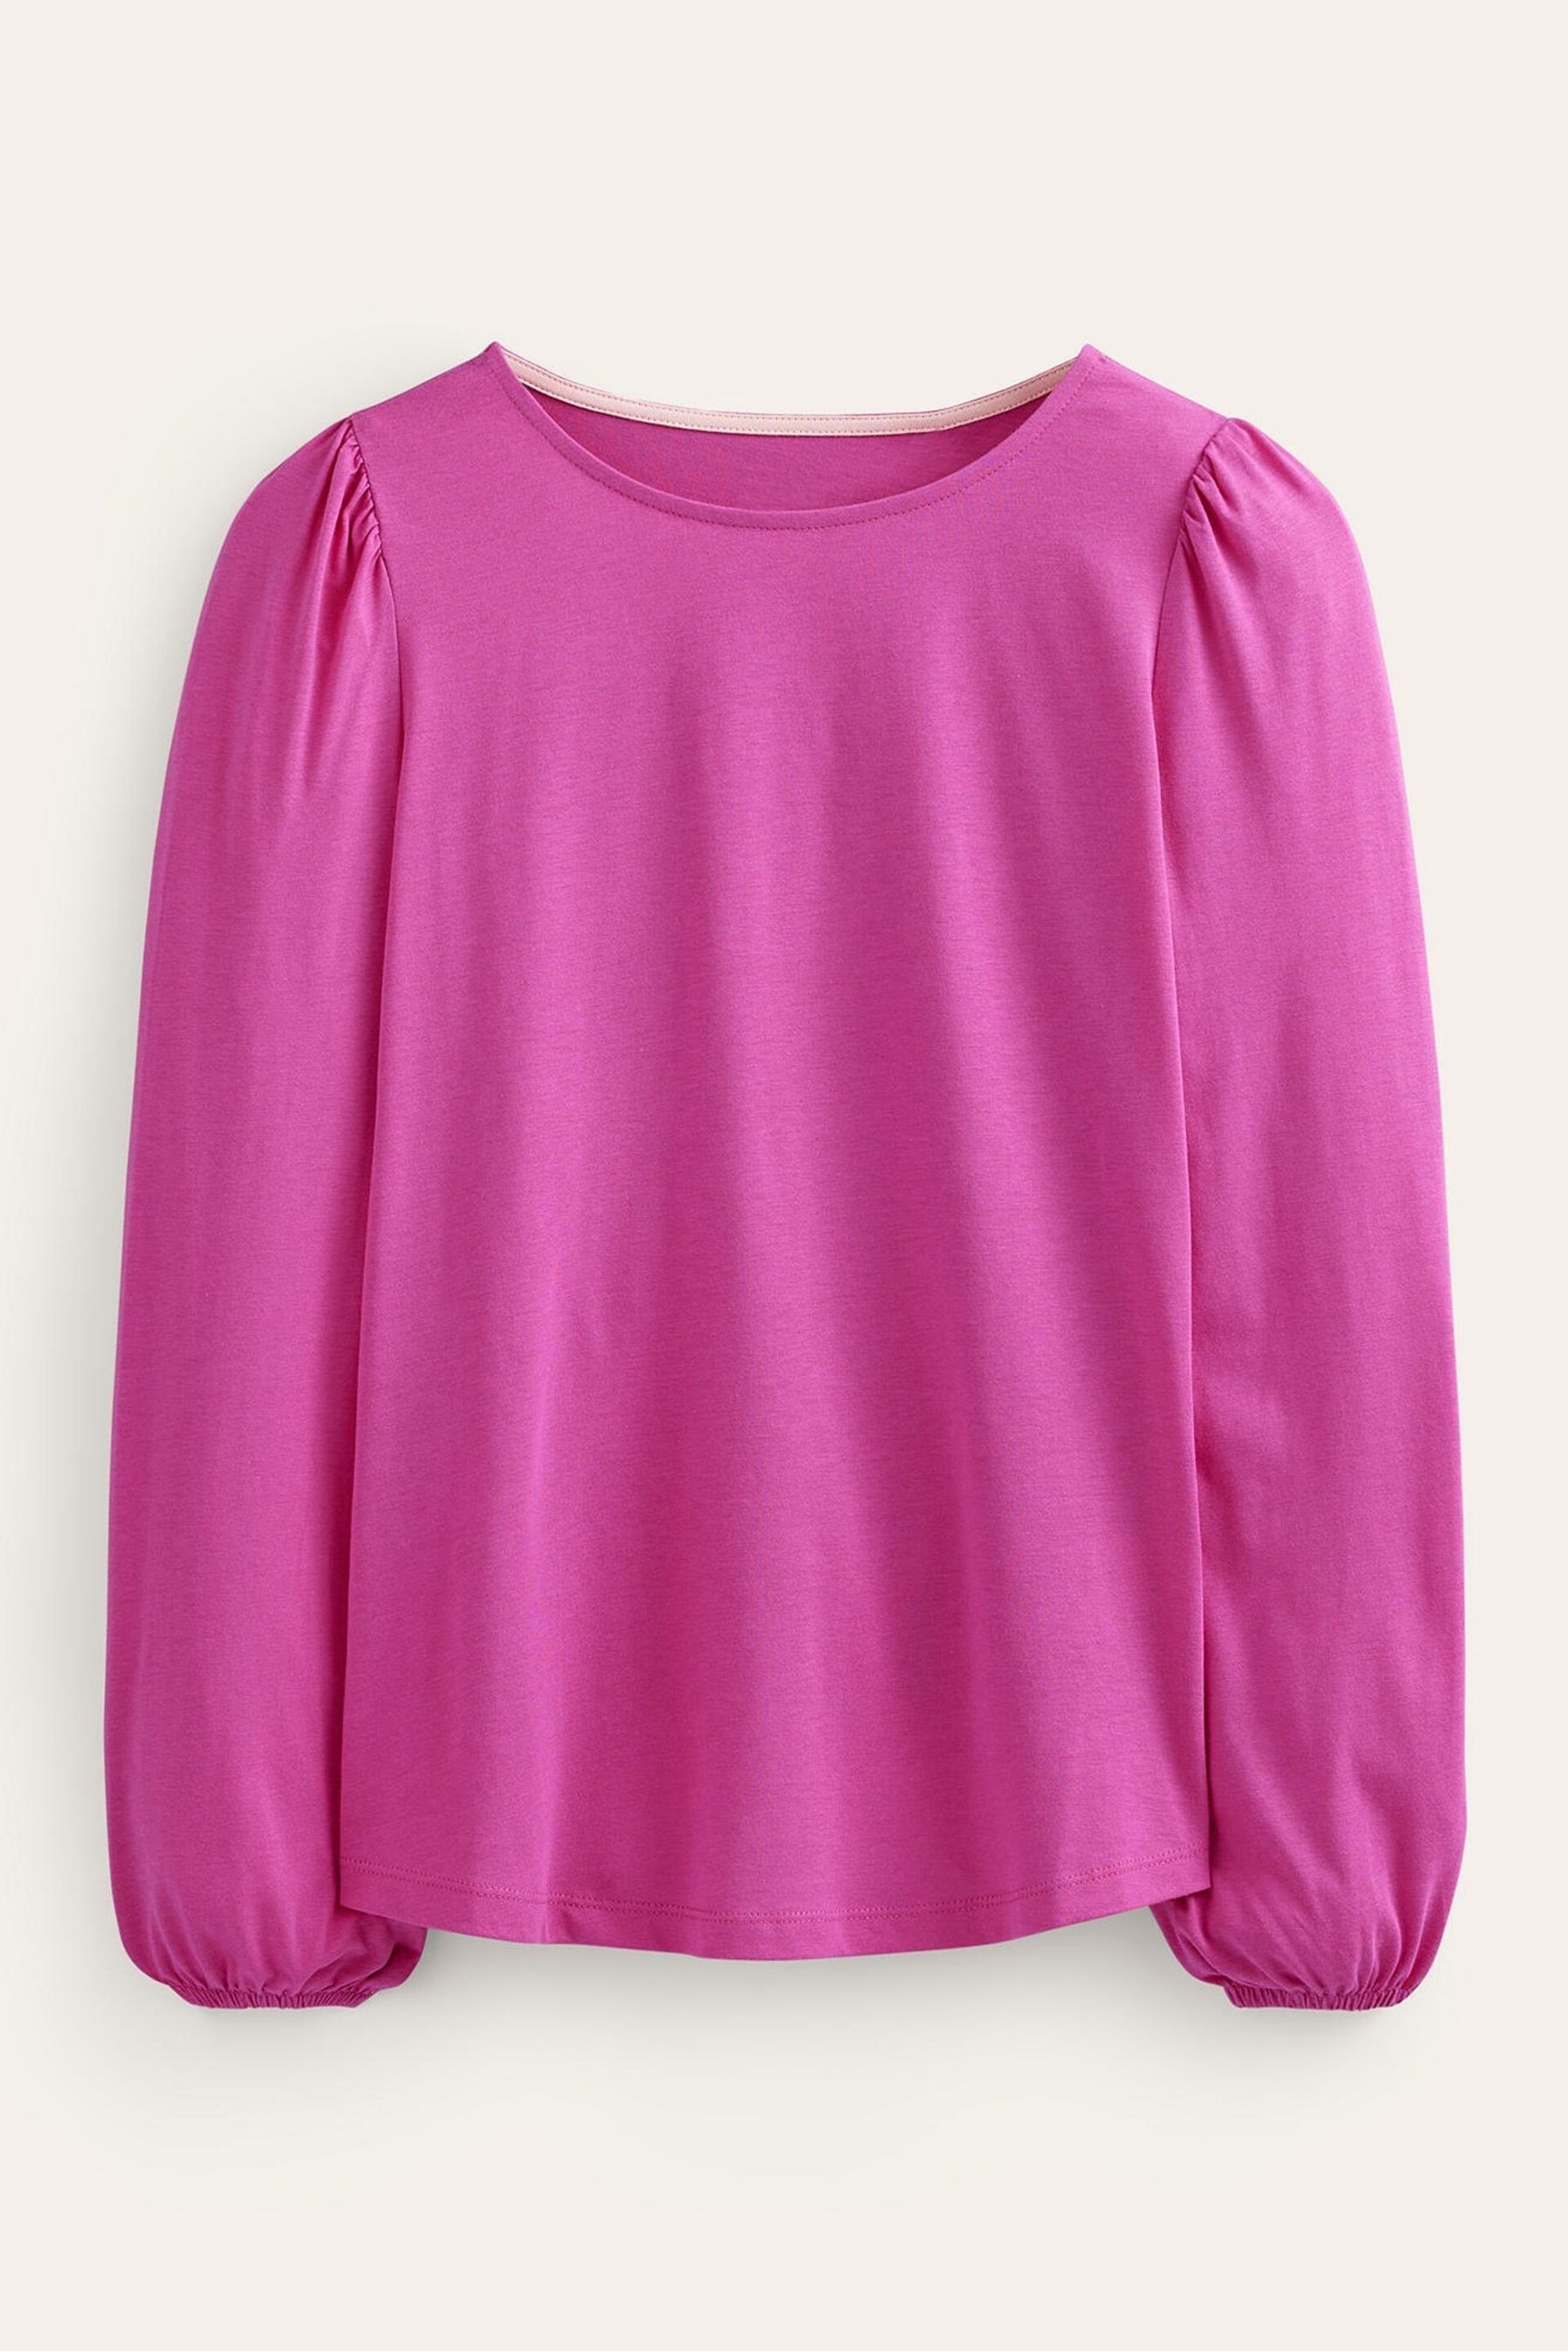 Boden Pink Supersoft Long Sleeve Top - Image 5 of 5